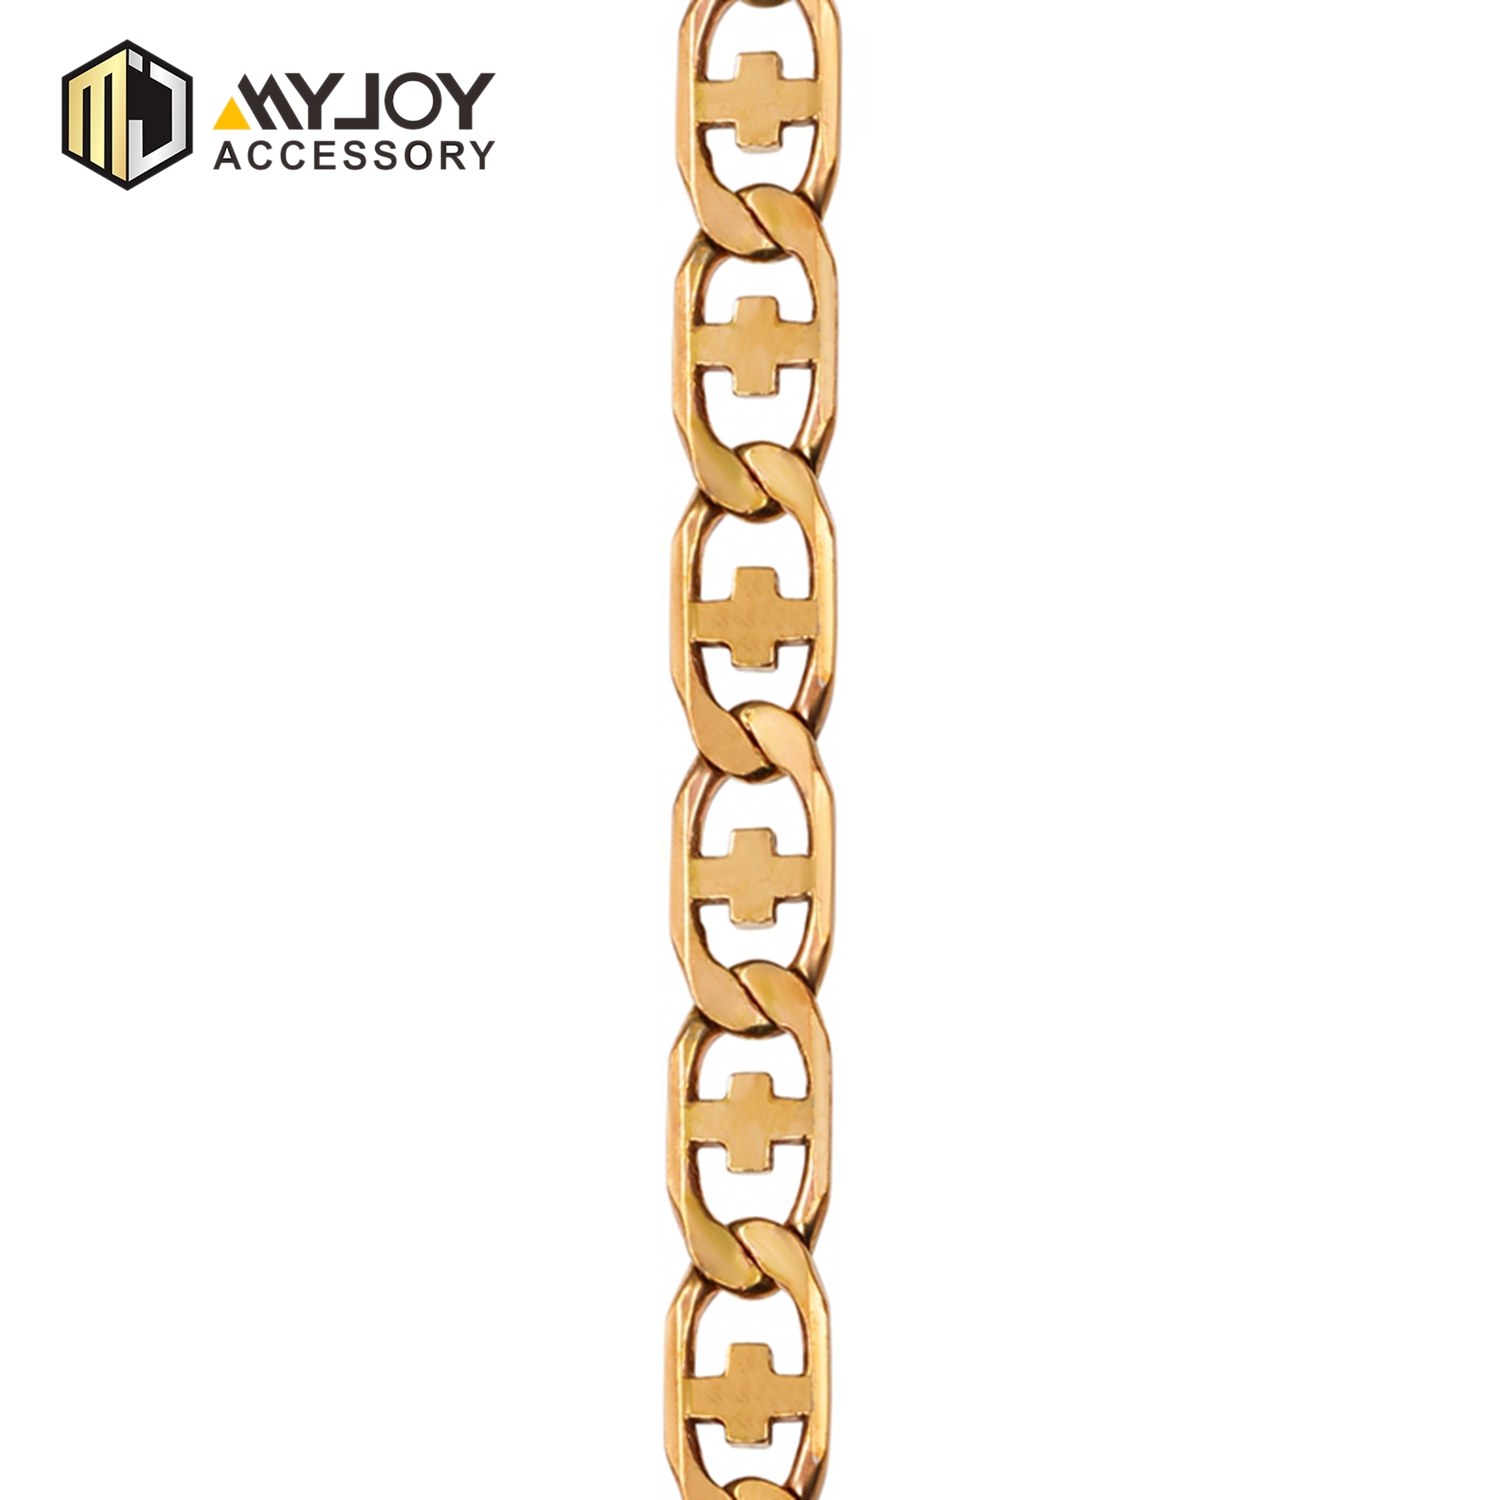 MYJOY New bag chain company for bags-2